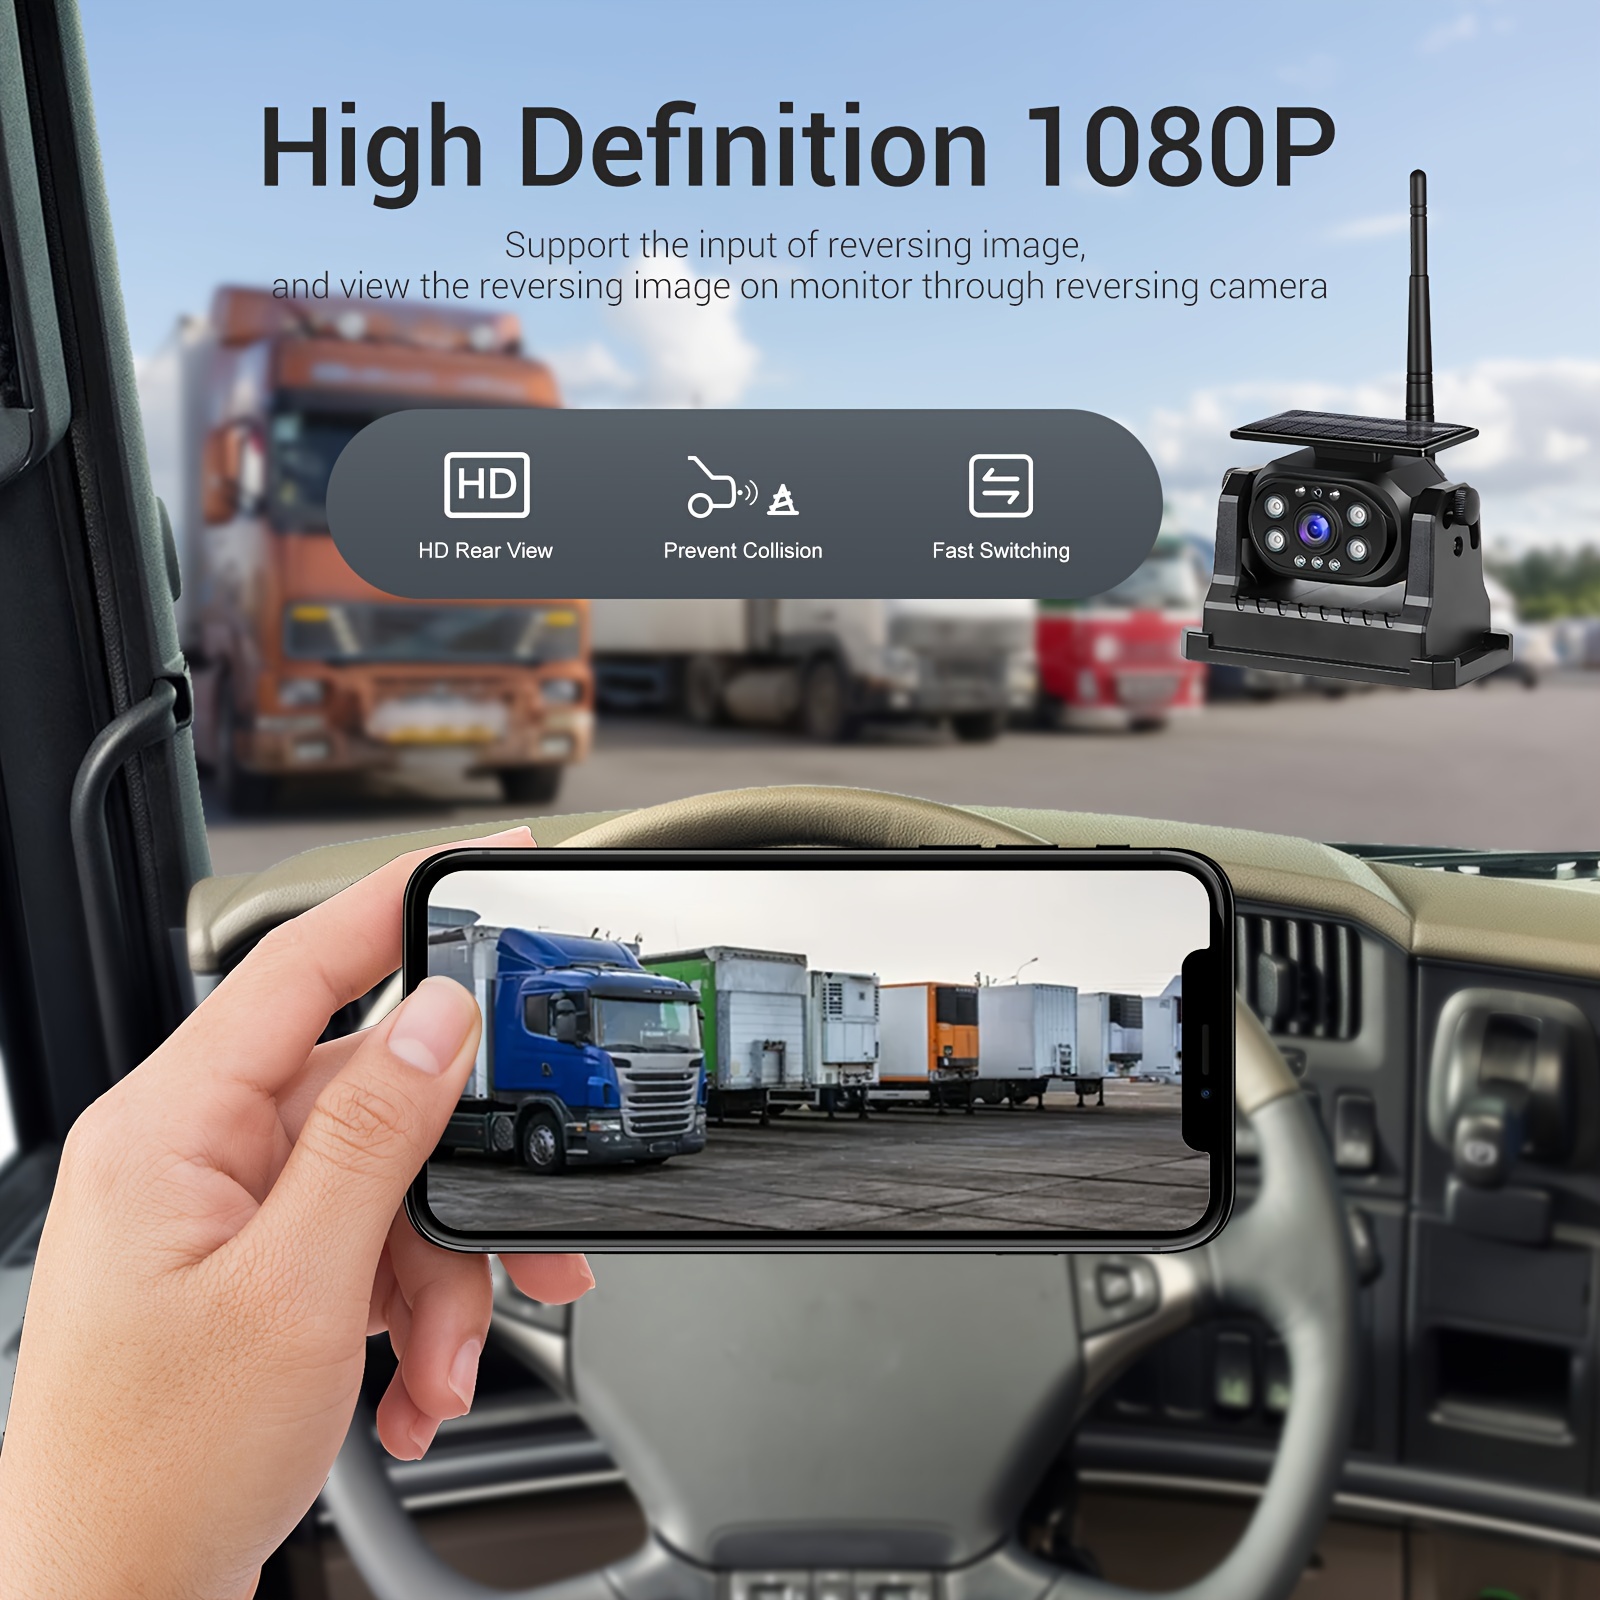 Car Wireless Reverse Cameras A Revolutionary Safety Feature for Your Vehicle